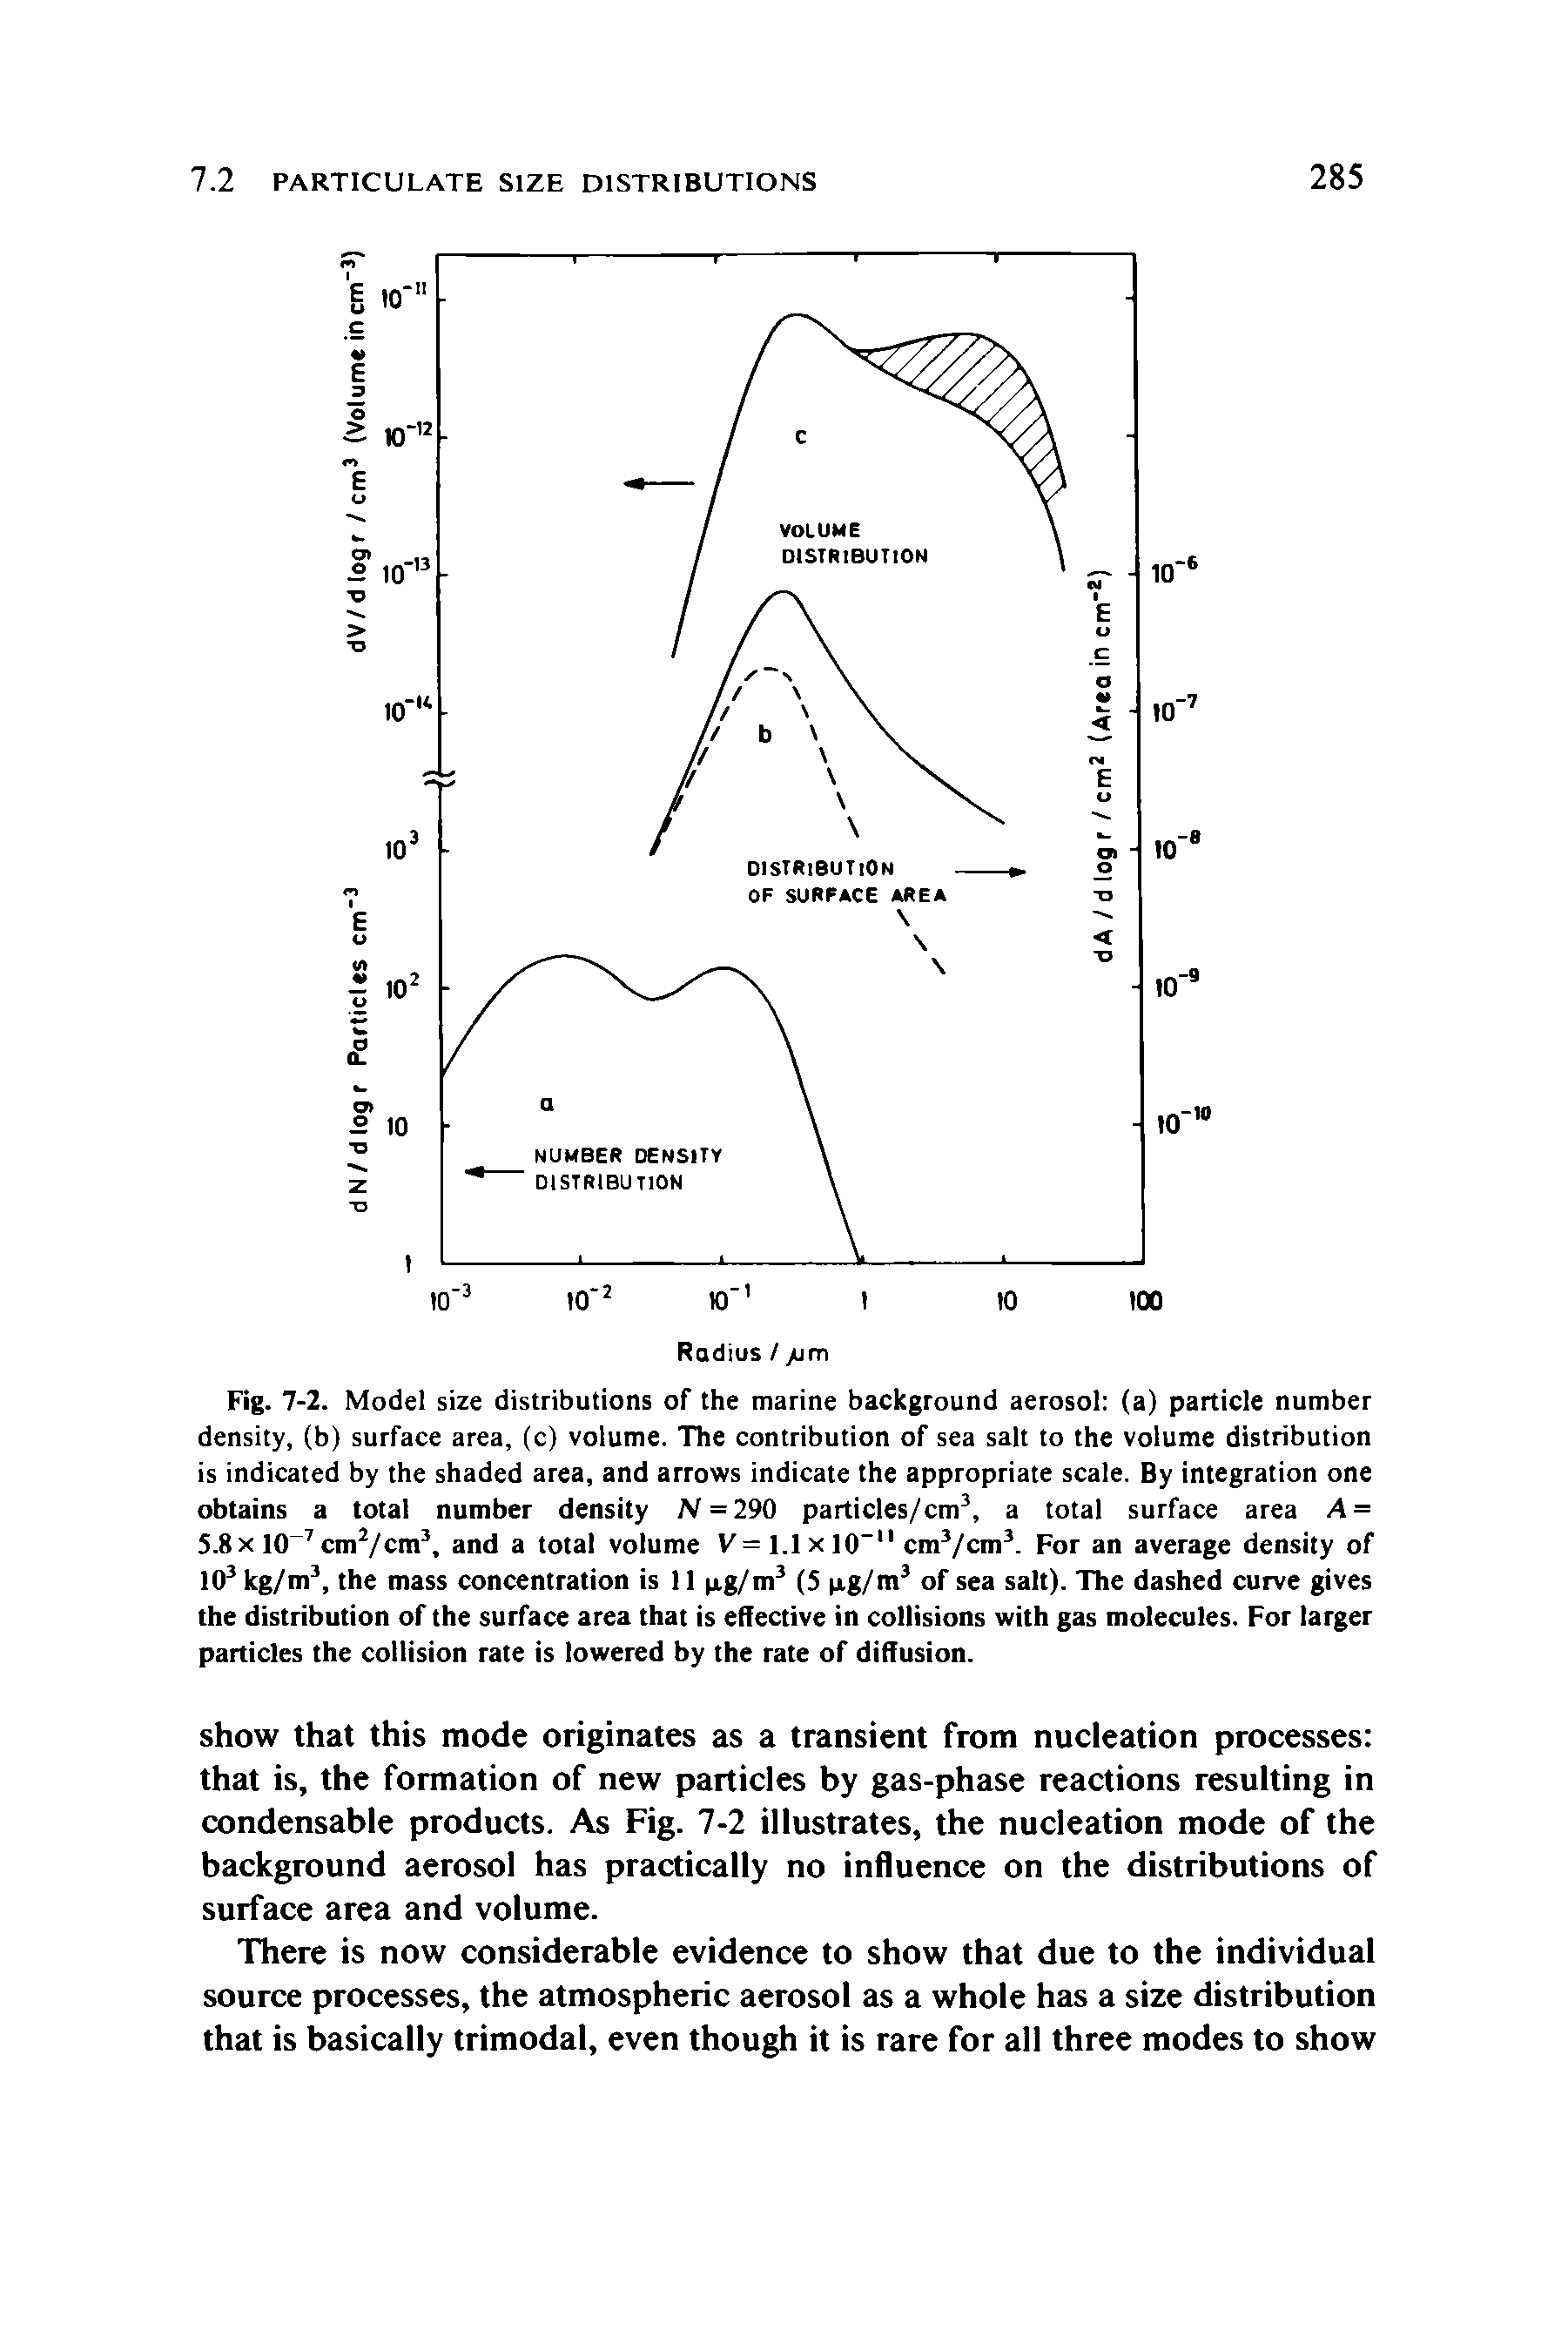 Fig. 7-2. Model size distributions of the marine background aerosol (a) particle number density, (b) surface area, (c) volume. The contribution of sea salt to the volume distribution is indicated by the shaded area, and arrows indicate the appropriate scale. By integration one obtains a total number density N =290 particles/cm3, a total surface area A = 5.8 x 10 7 cm2/cm3, and a total volume V= 1.1 x 10 " cm3/cm3. For an average density of 103 kg/m3, the mass concentration is 11 pig/m3 (5 pig/m3 of sea salt). The dashed curve gives the distribution of the surface area that is effective in collisions with gas molecules. For larger particles the collision rate is lowered by the rate of diffusion.